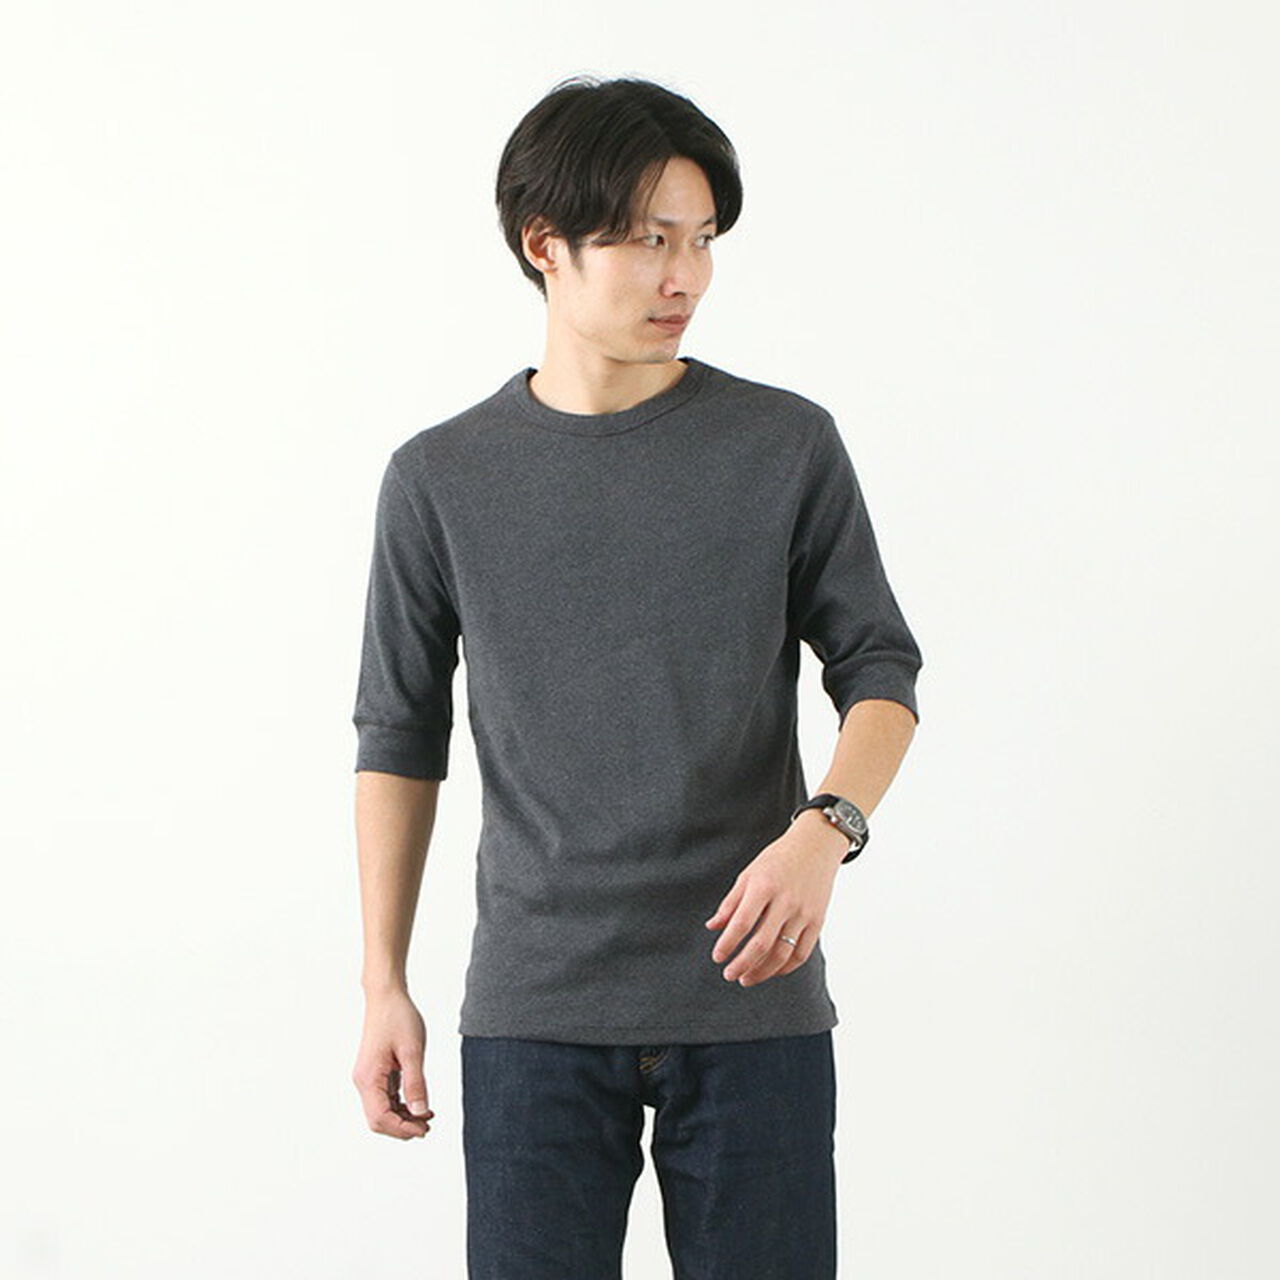 Smooth Cotton Ribbed Crew T-Shirt,Charcoal, large image number 0